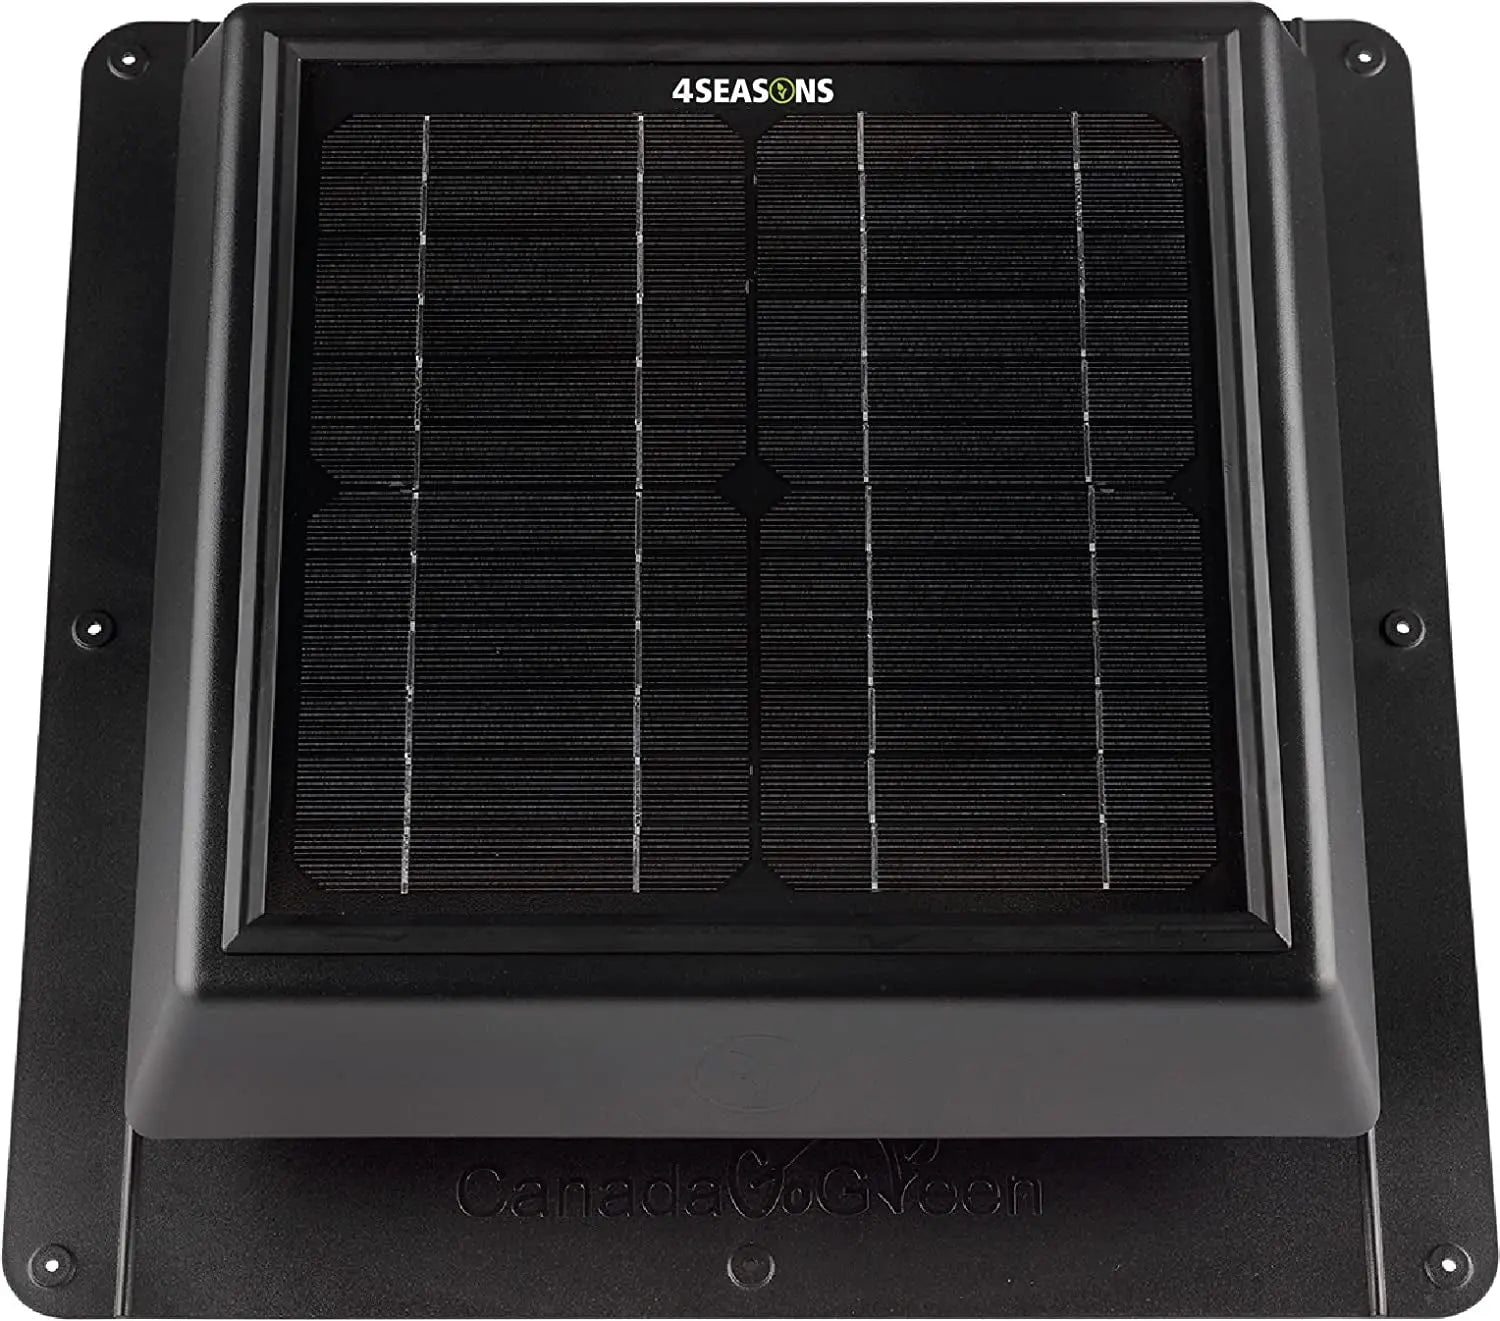 4 Seasons Solar Powered Polycarbonate Vent, Weatherproof Design, Quietly Cools up to 500 Sq Ft, 400 CFM